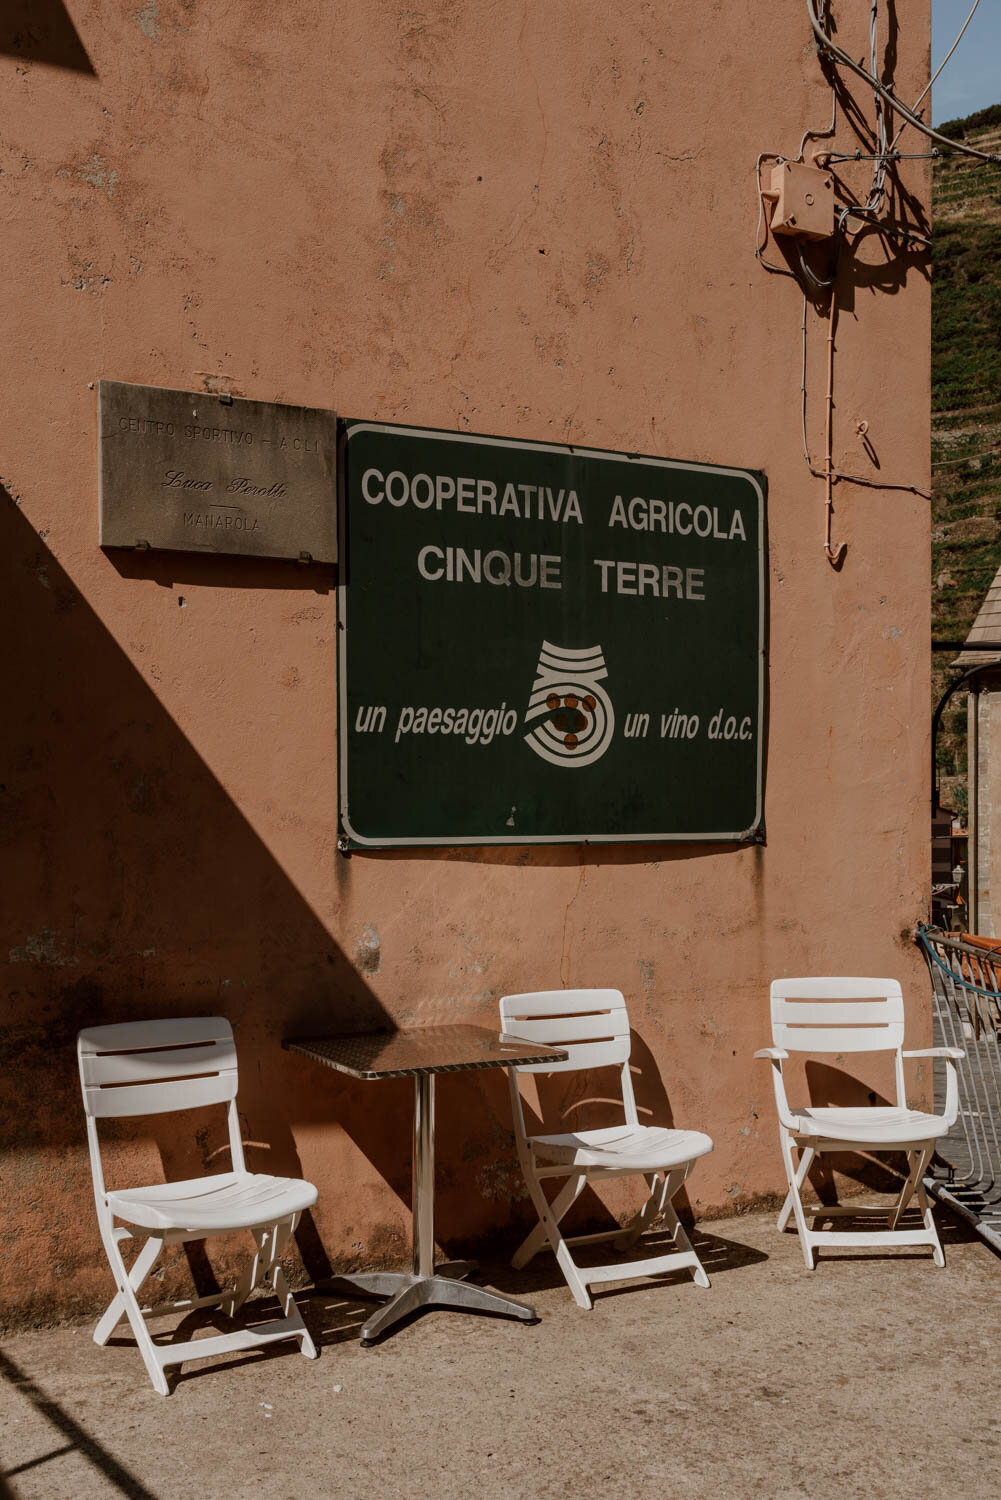 sign for cooperativa agricola cinque terre and chairs in the sun